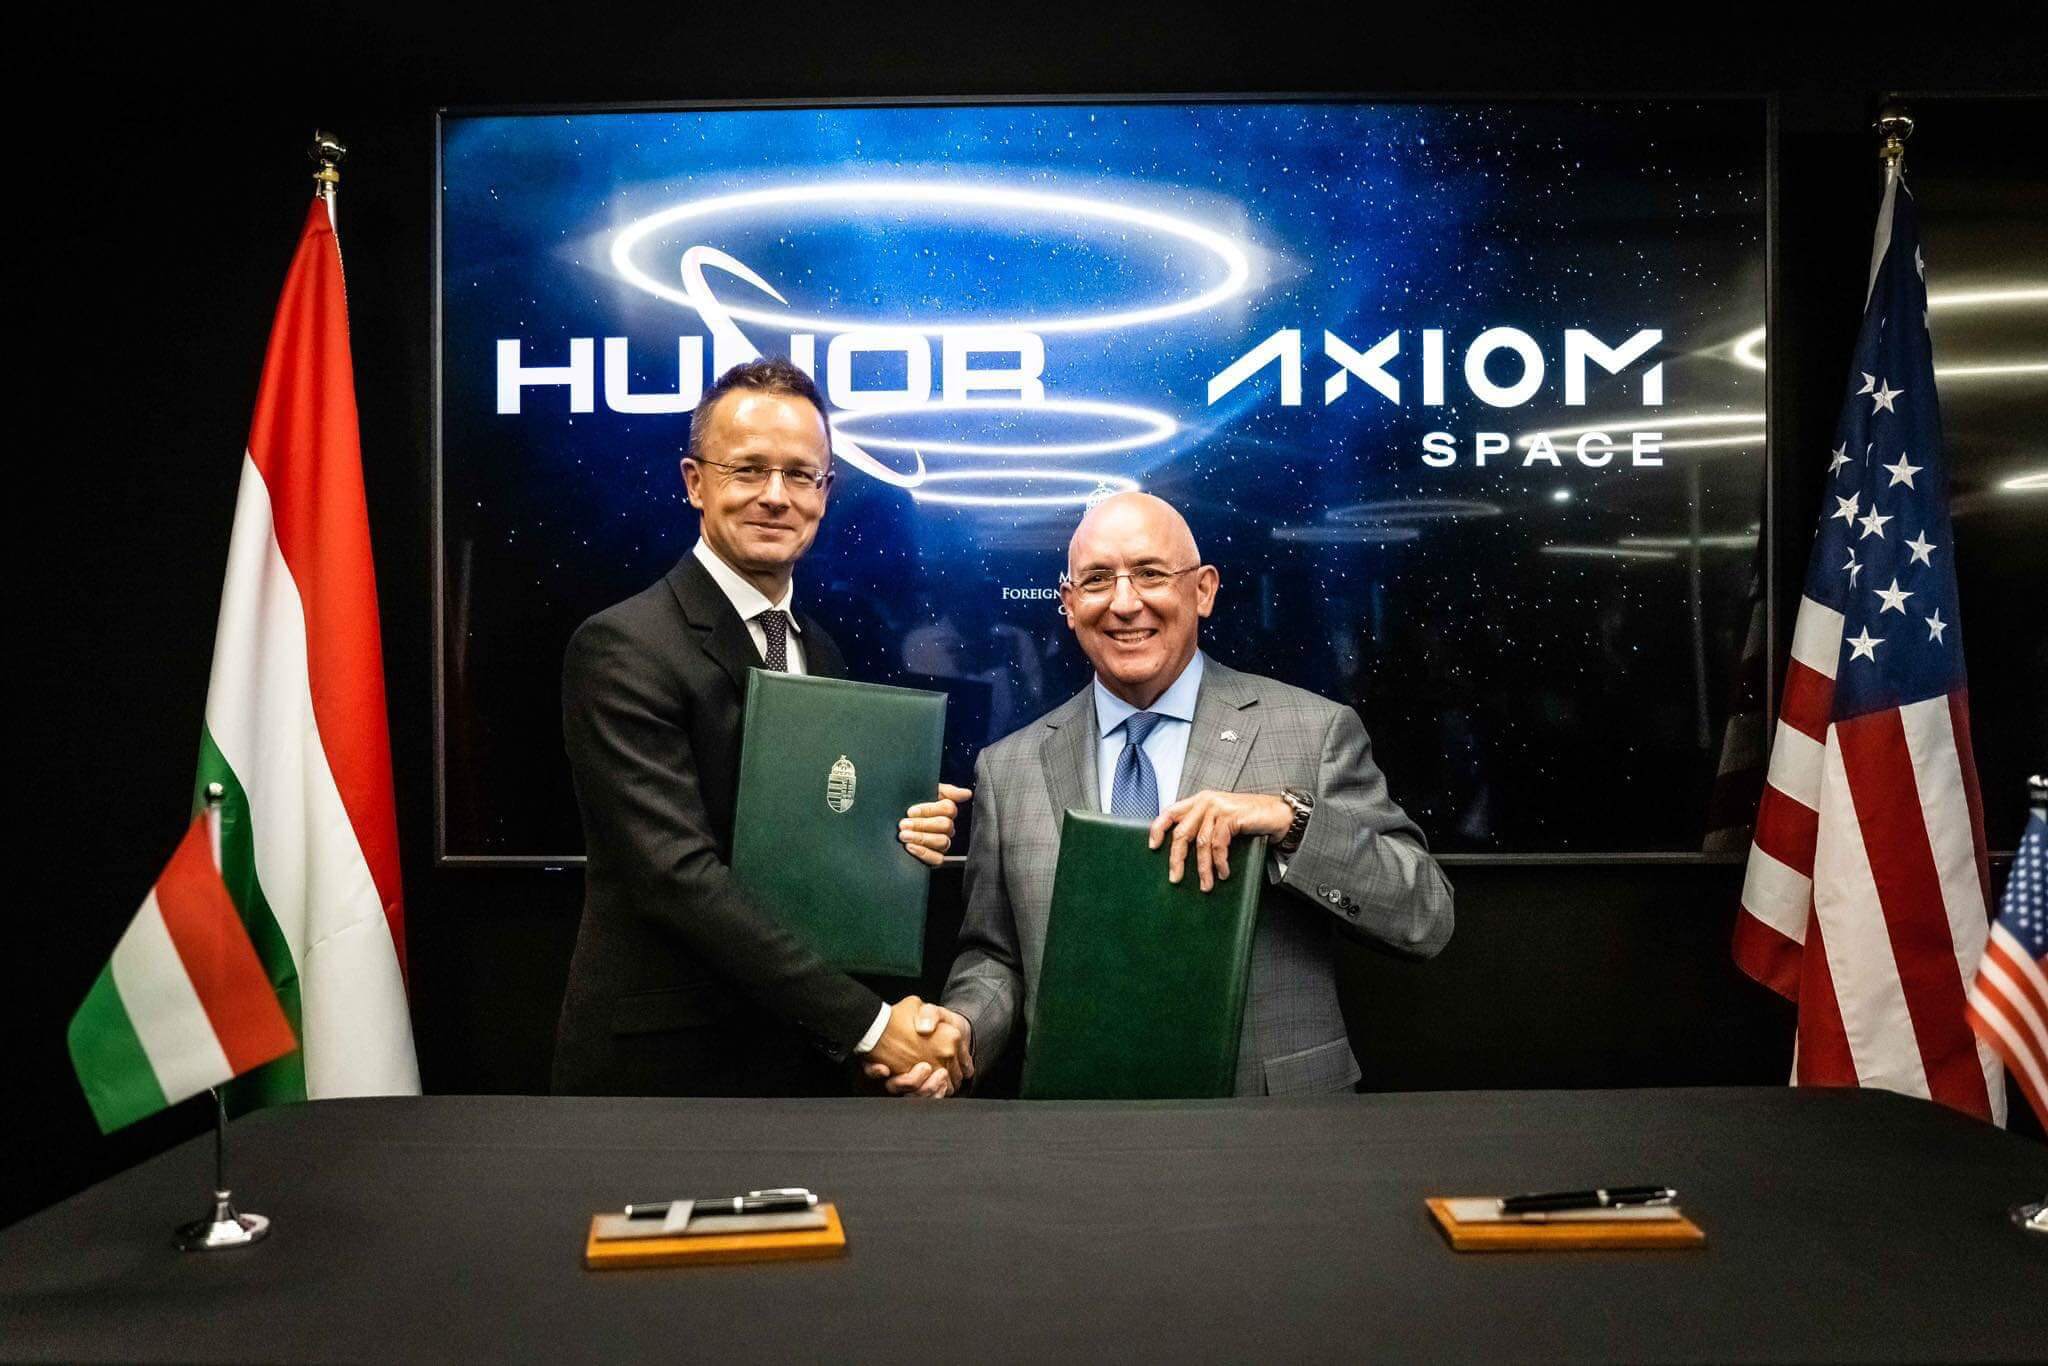 Now Confirmed: Hungary Will Once Again Send an Astronaut into Space